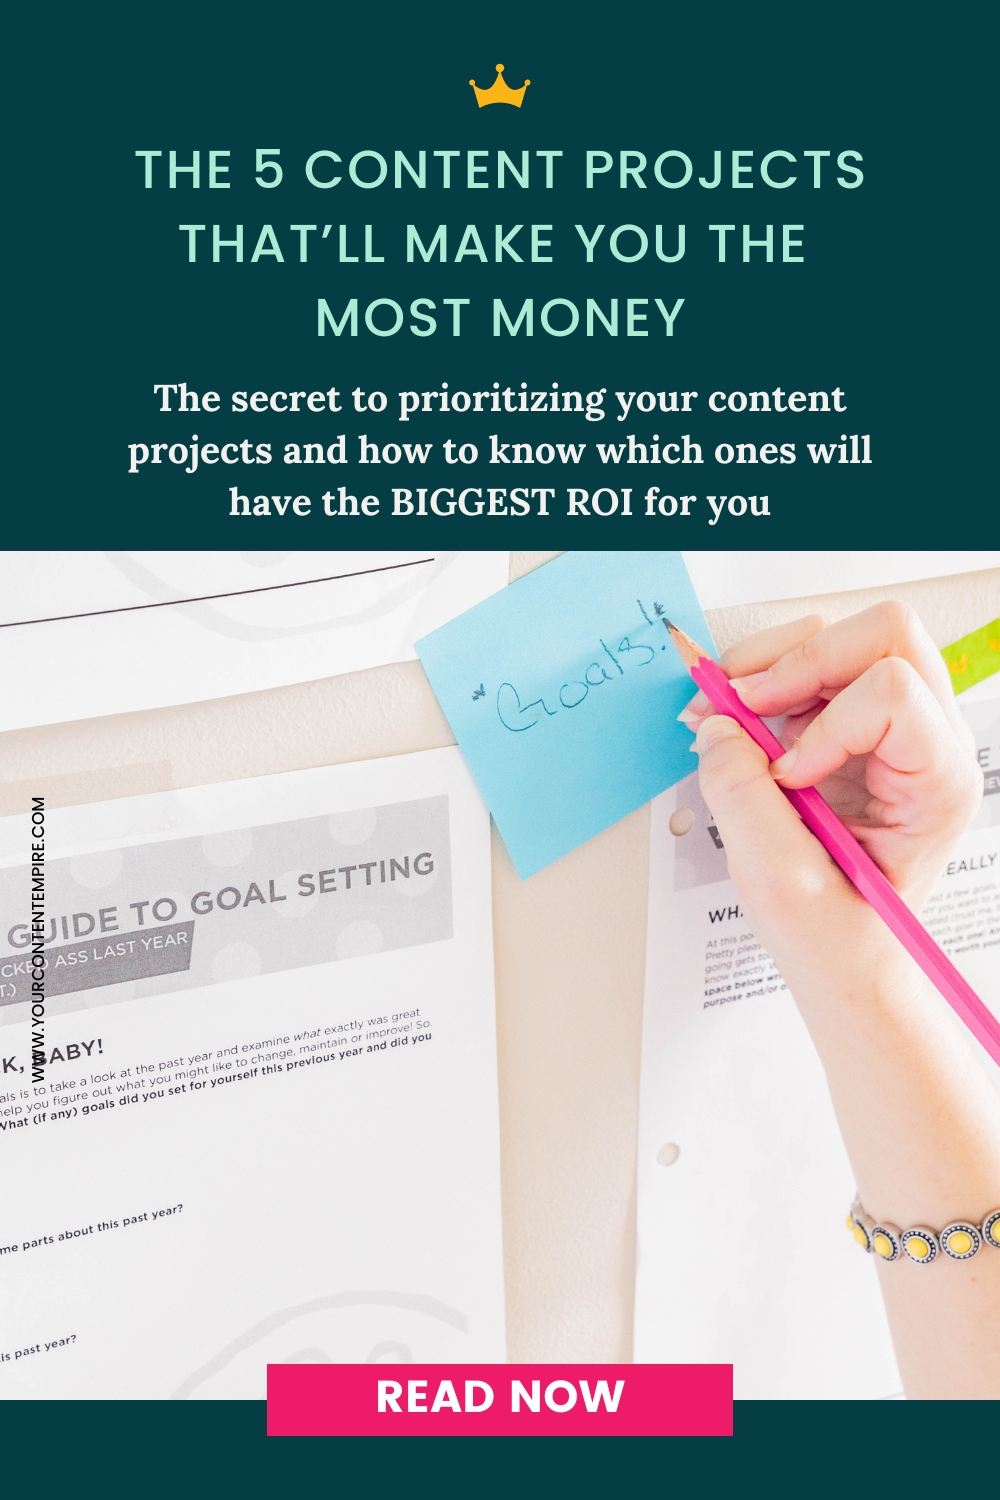 The 5 Content Projects That’ll Make You The Most Money